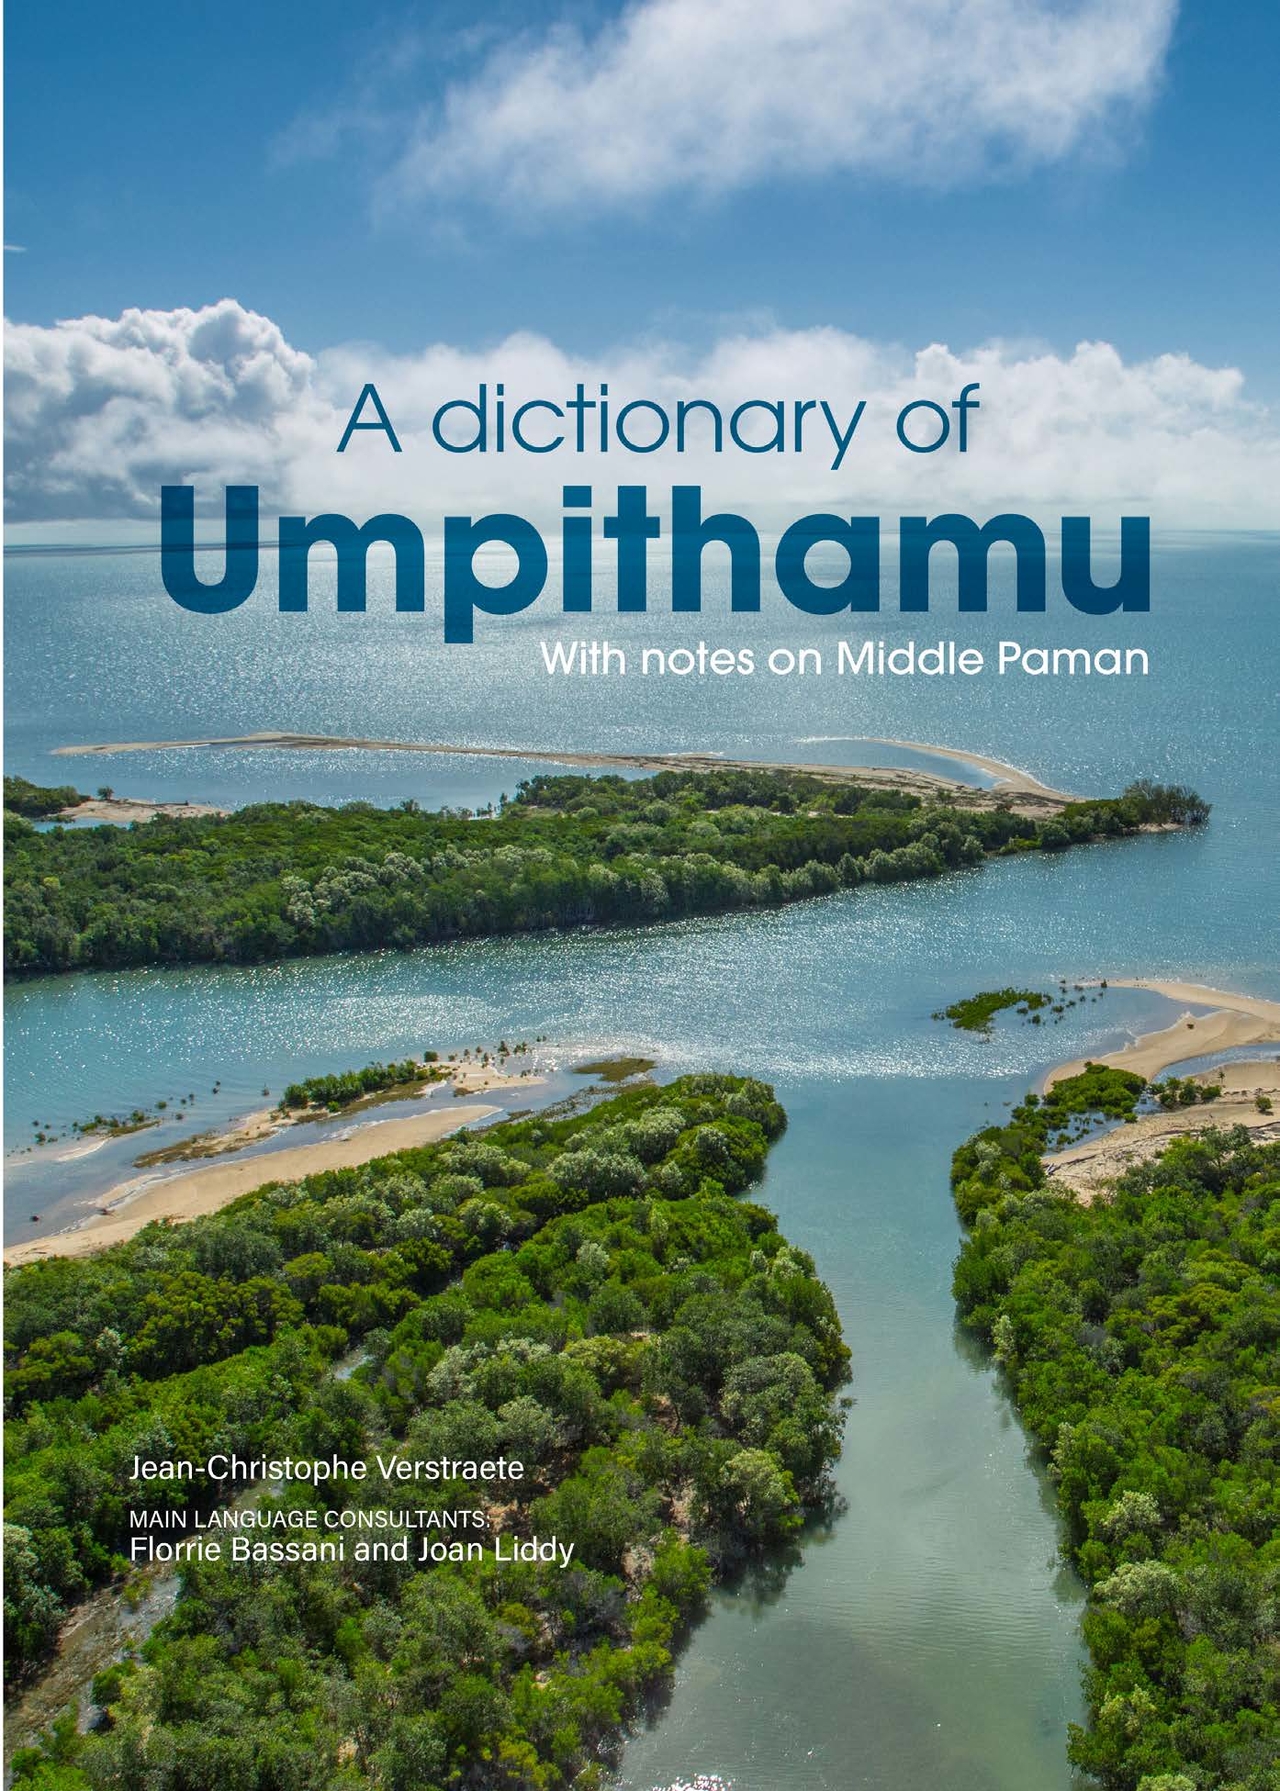 A dictionary of Umpithamu with notes on Middle Paman